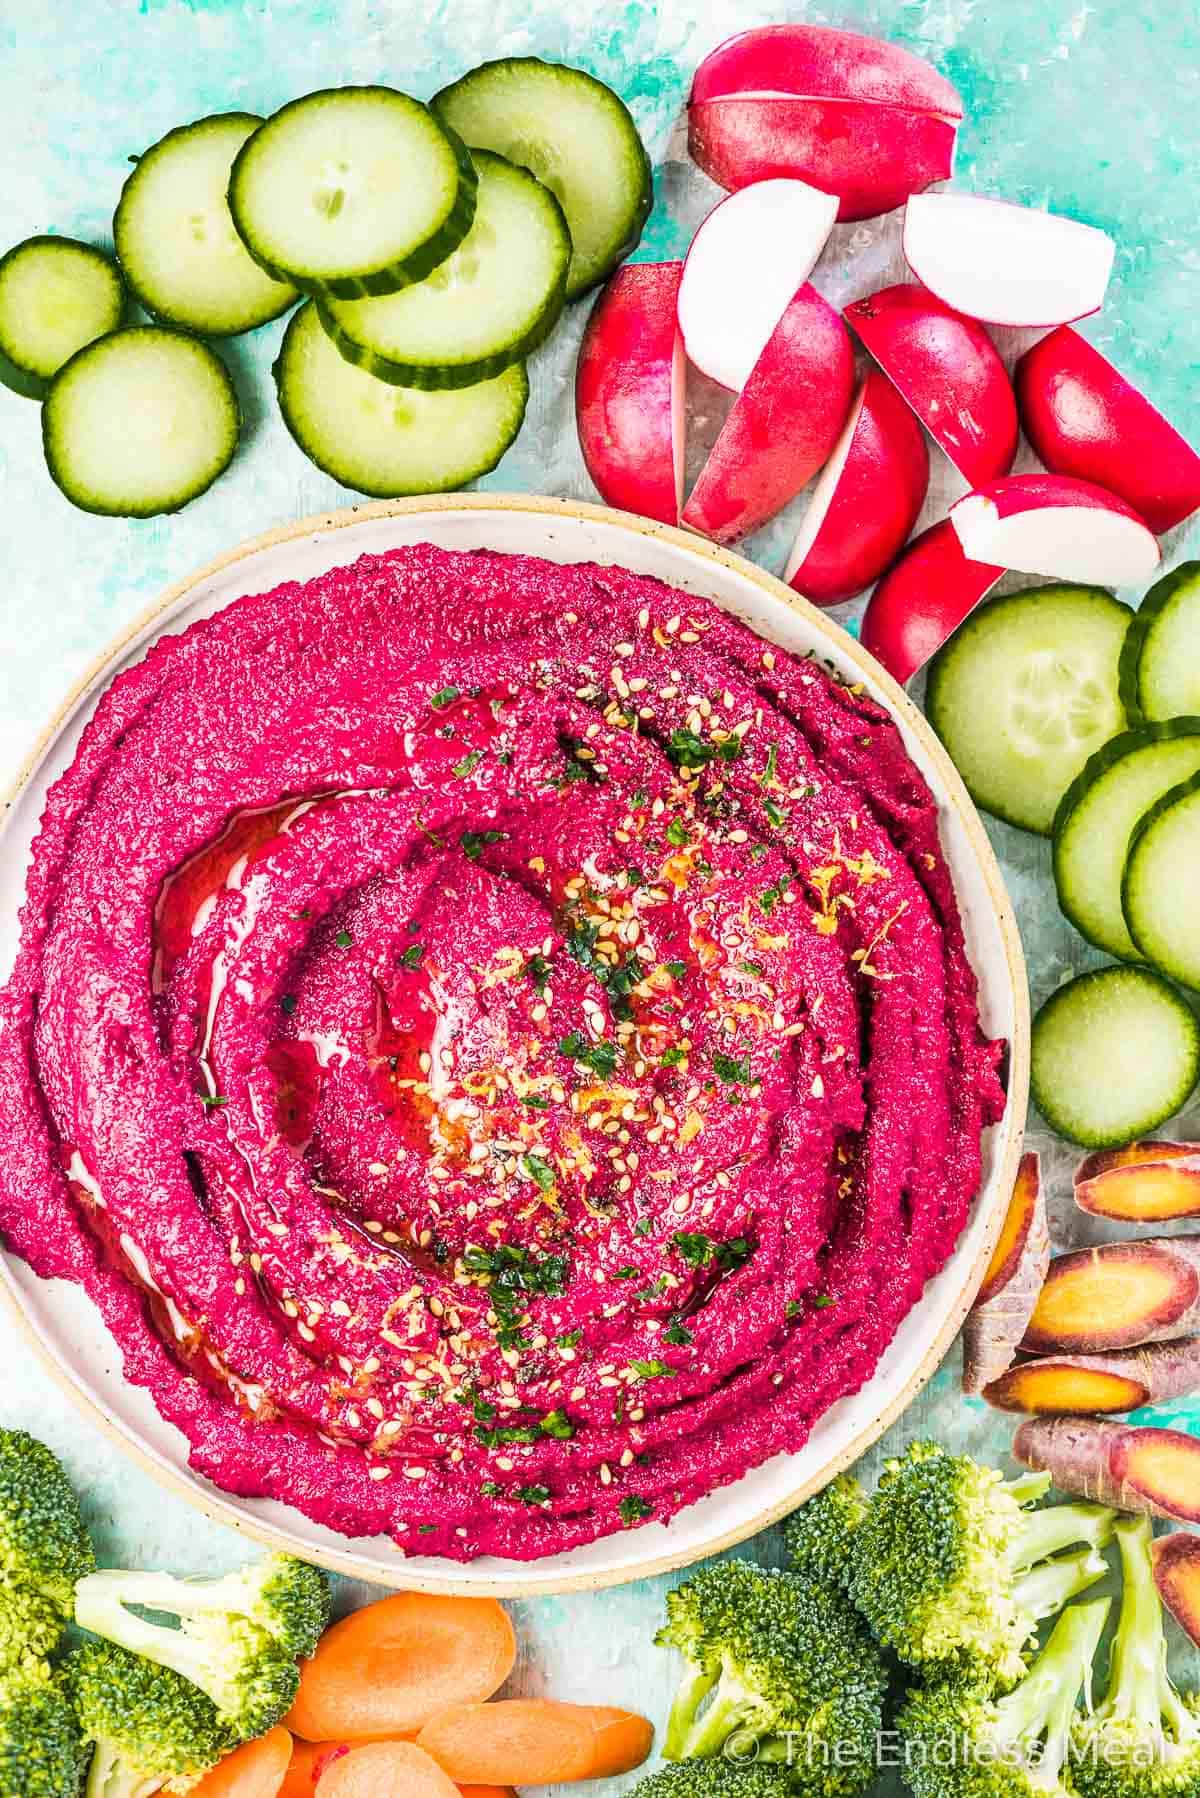 Beet hummus in a white bowl surrounded by veggies.